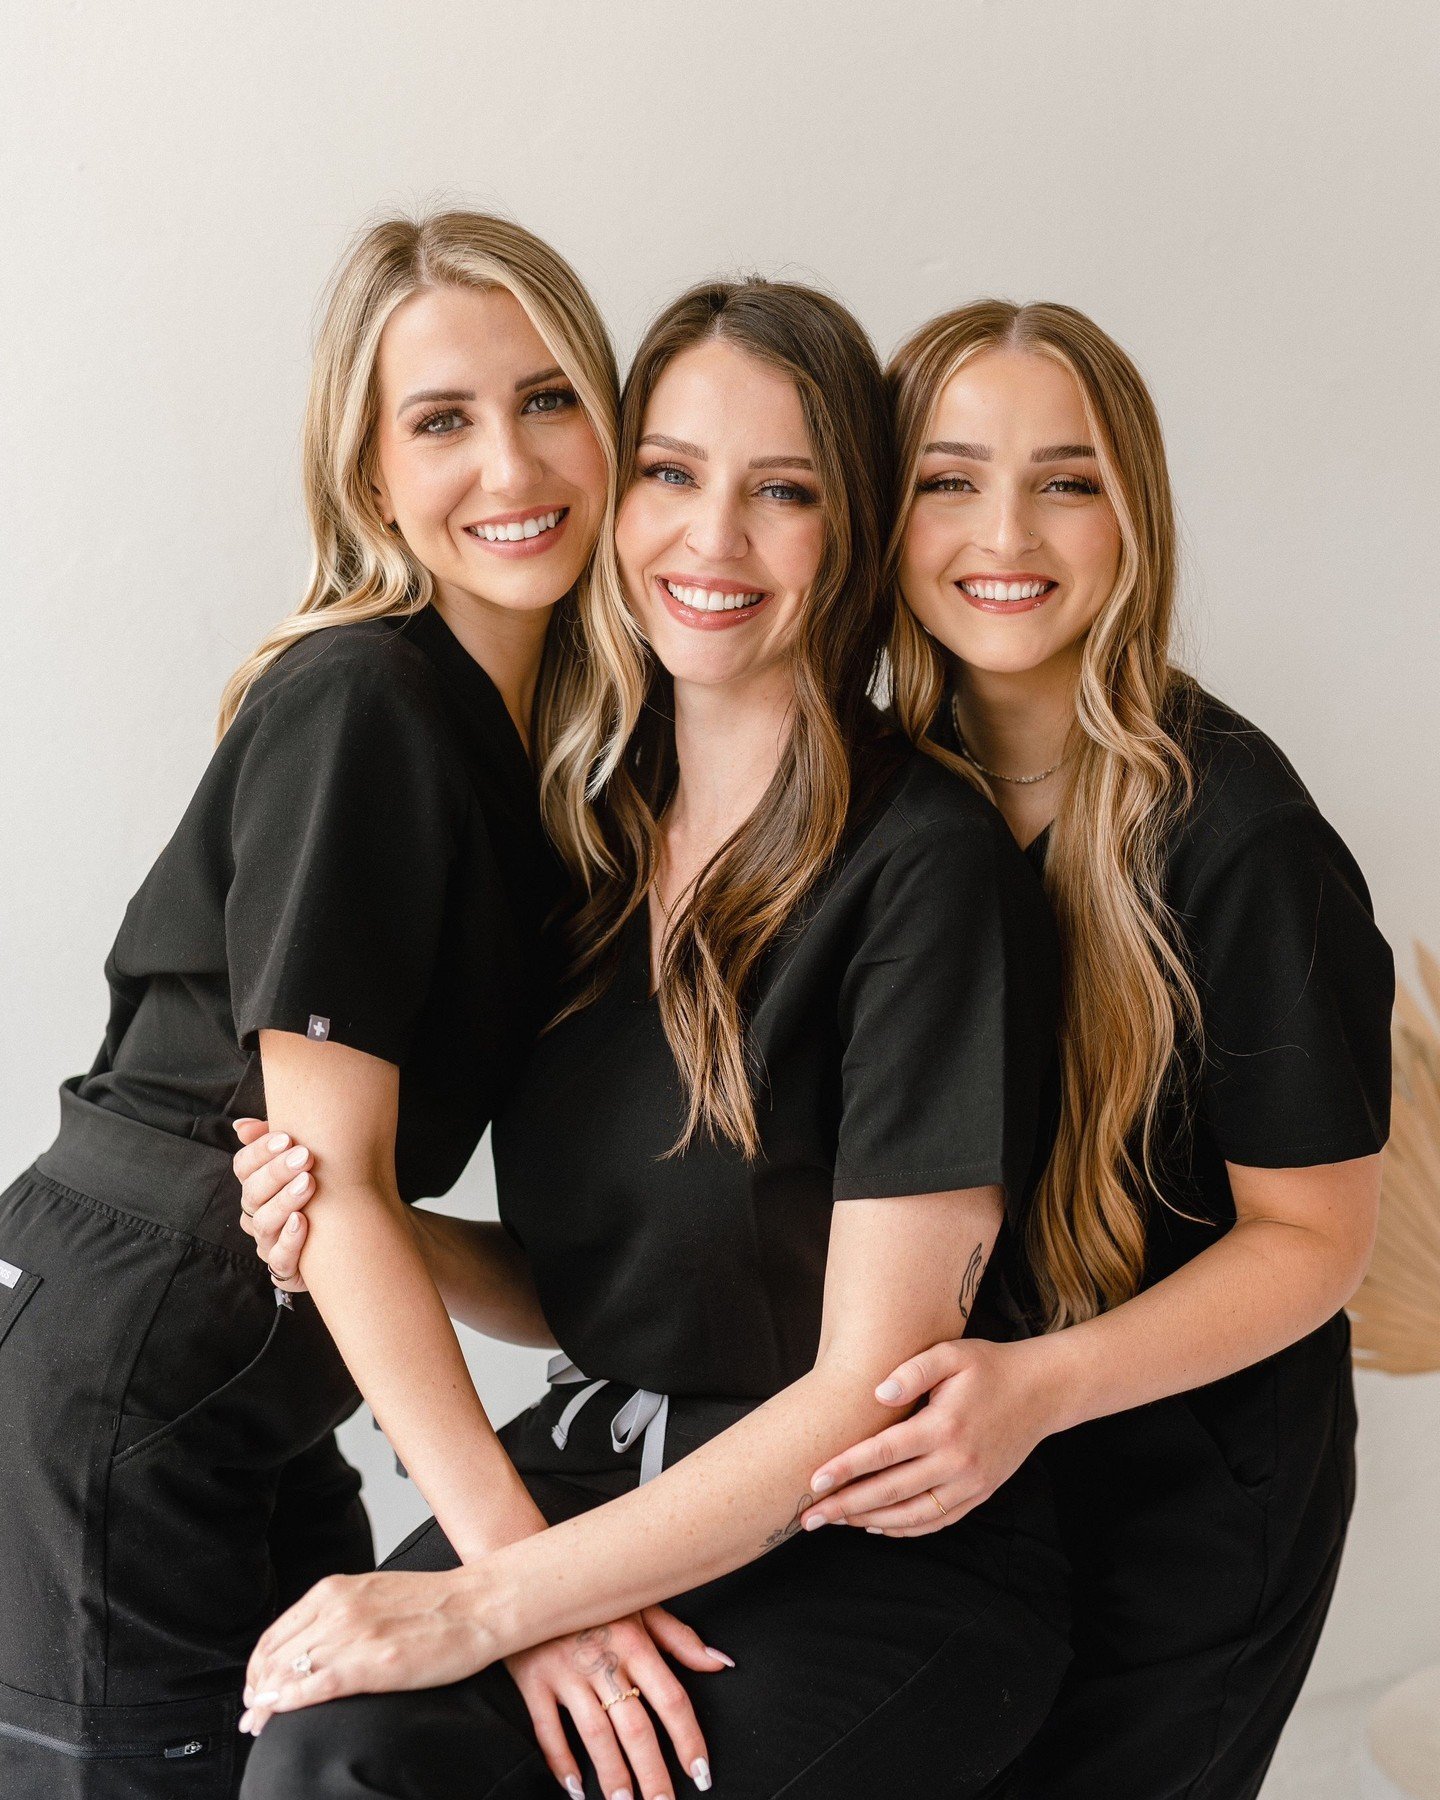 Welcome to Brow Canvas 🤎

Founded by Amber in 2016 and officially branded as Brow Canvas in 2018, our team comprises highly educated, well-rounded, and exceptionally talented professionals who are here to elevate and revolutionize the brow industry.